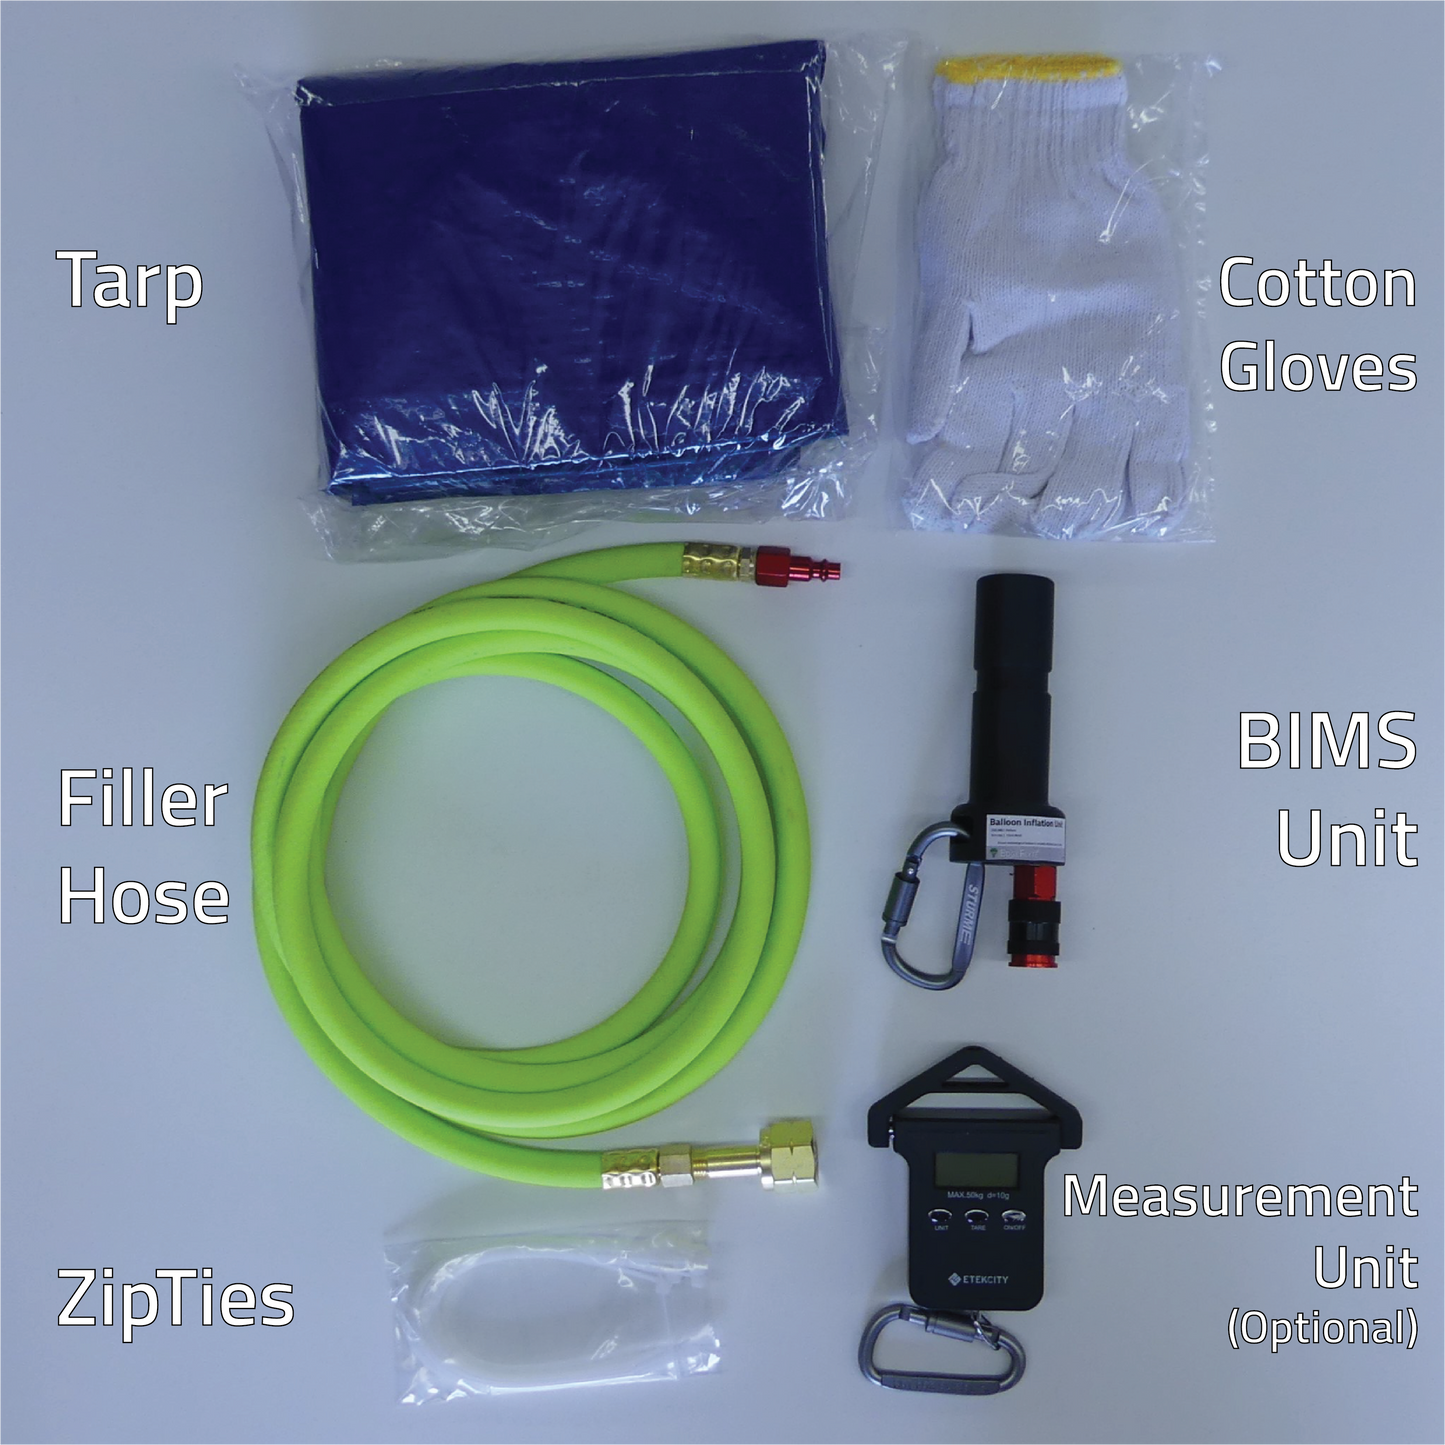 Balloon Inflation and Measurement System